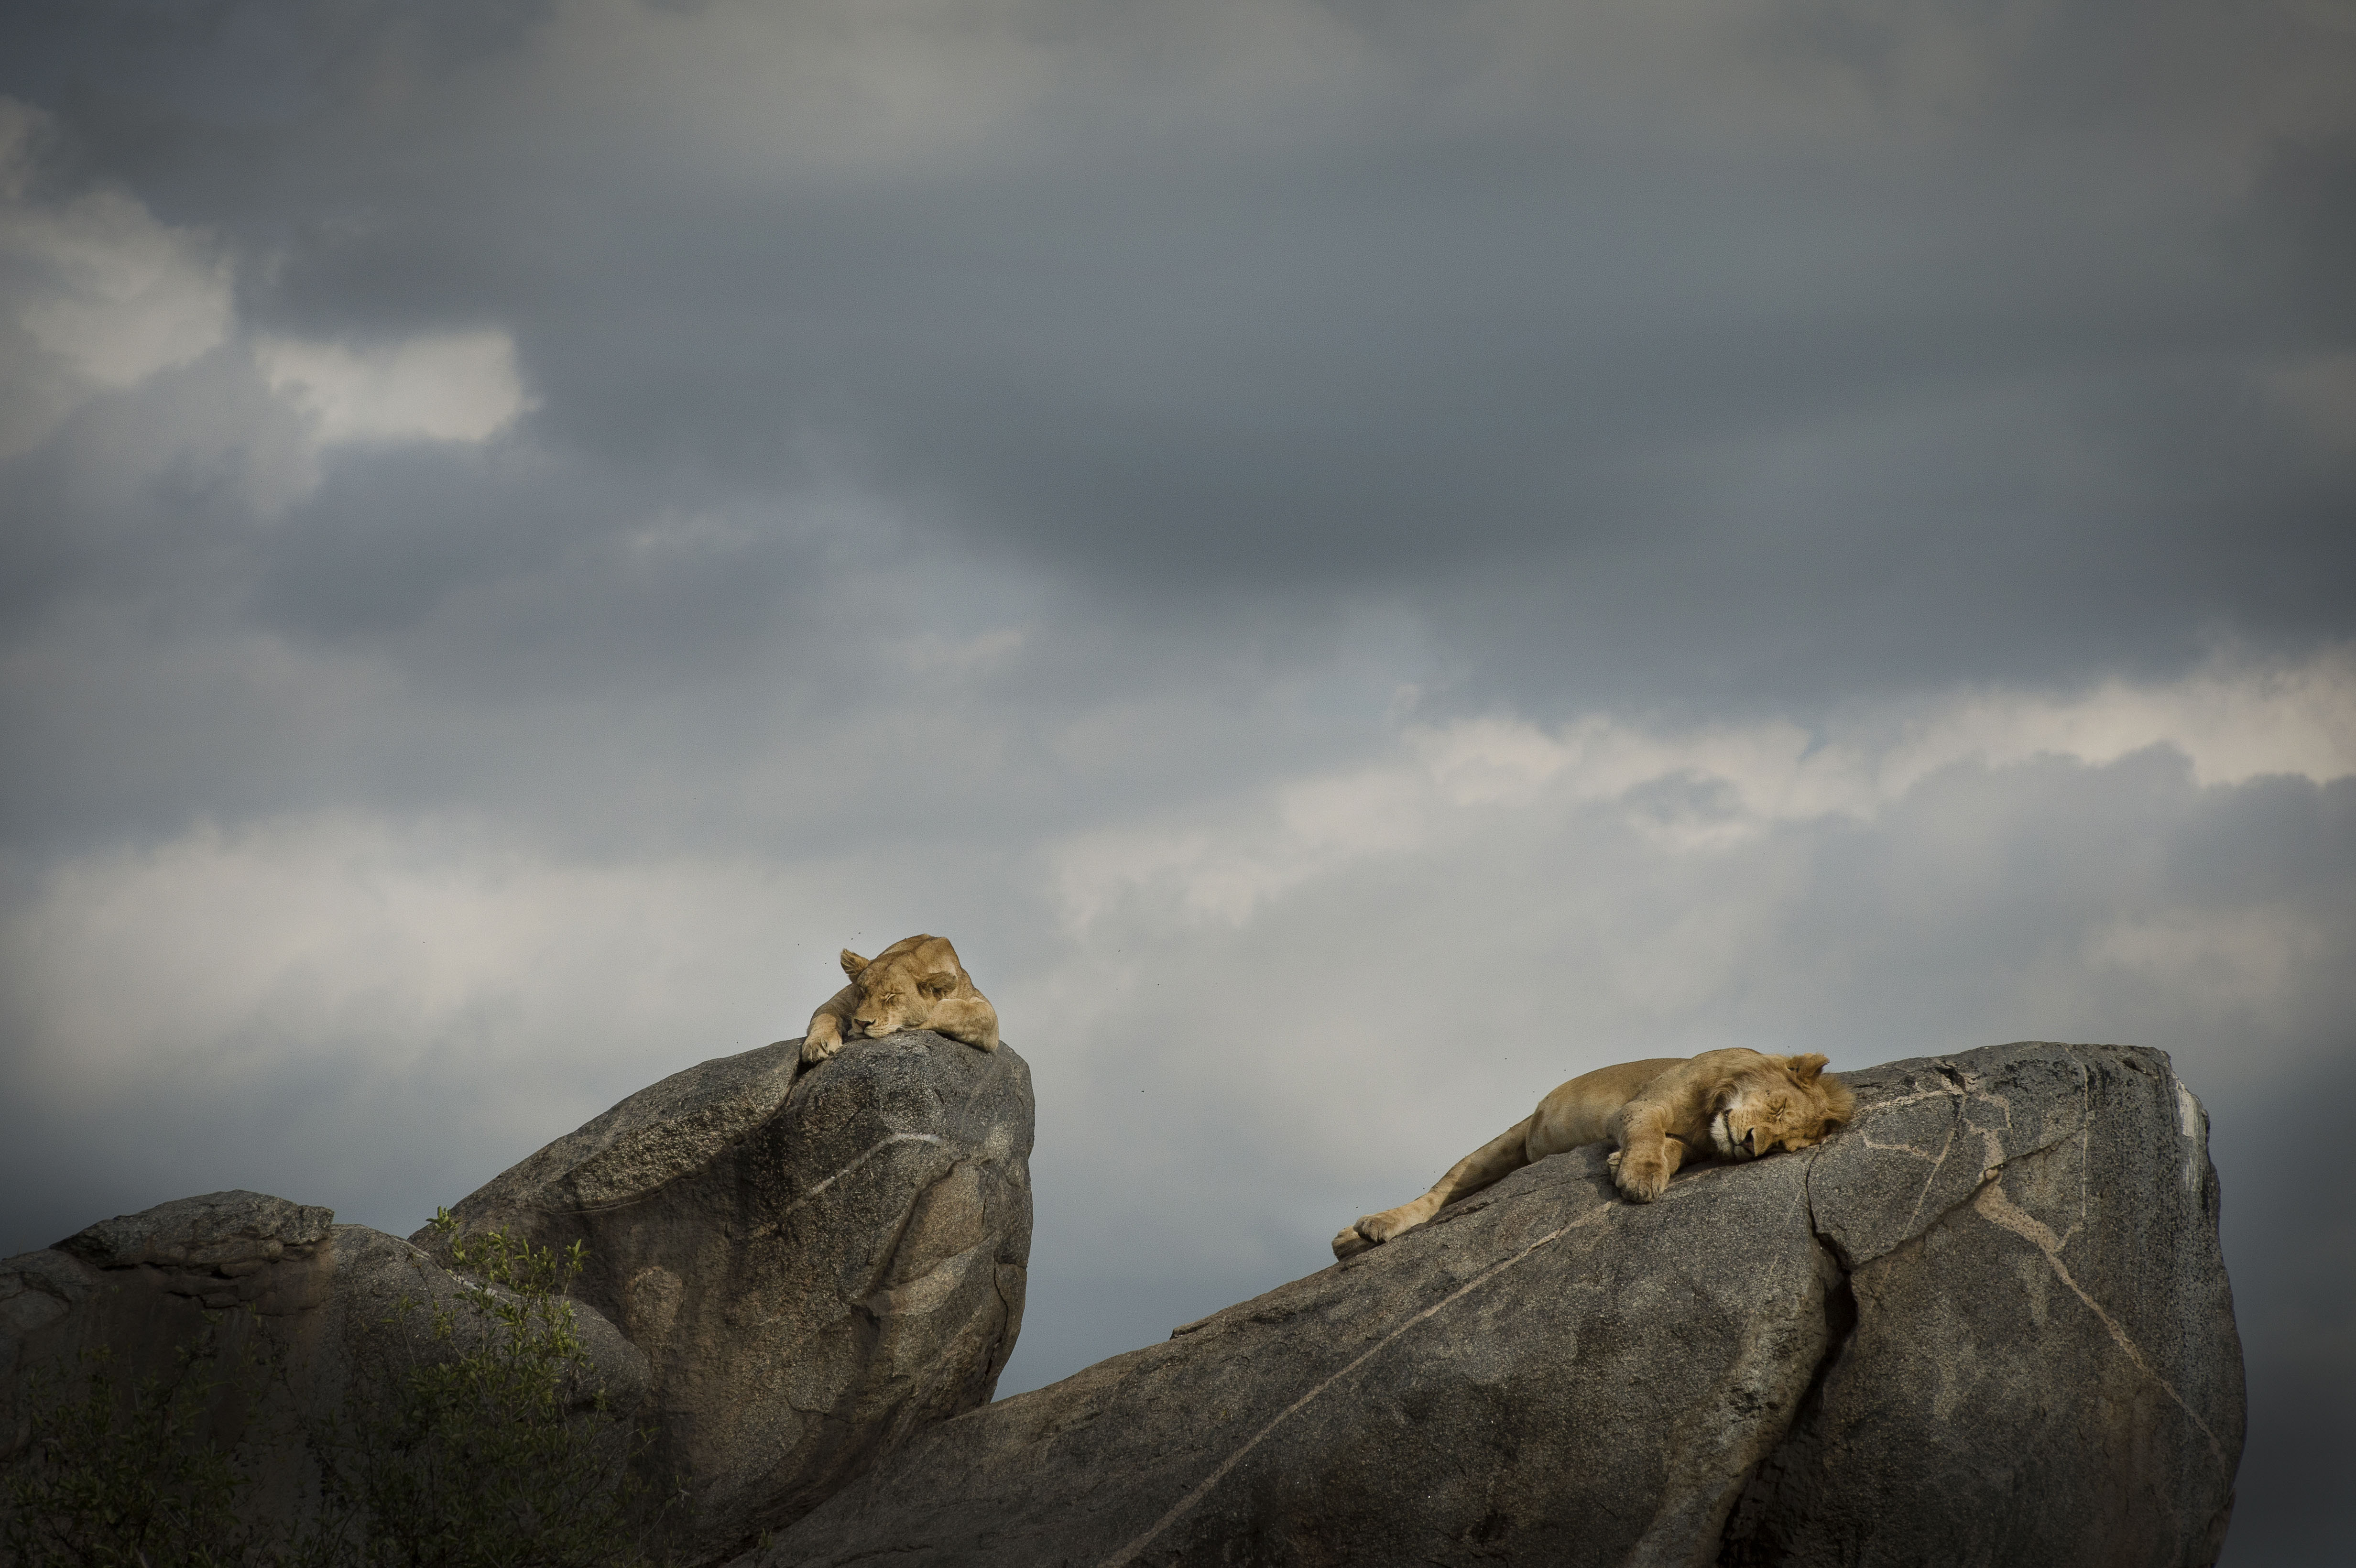 Two lions sleep on a rocky outcrop against a stormy sky